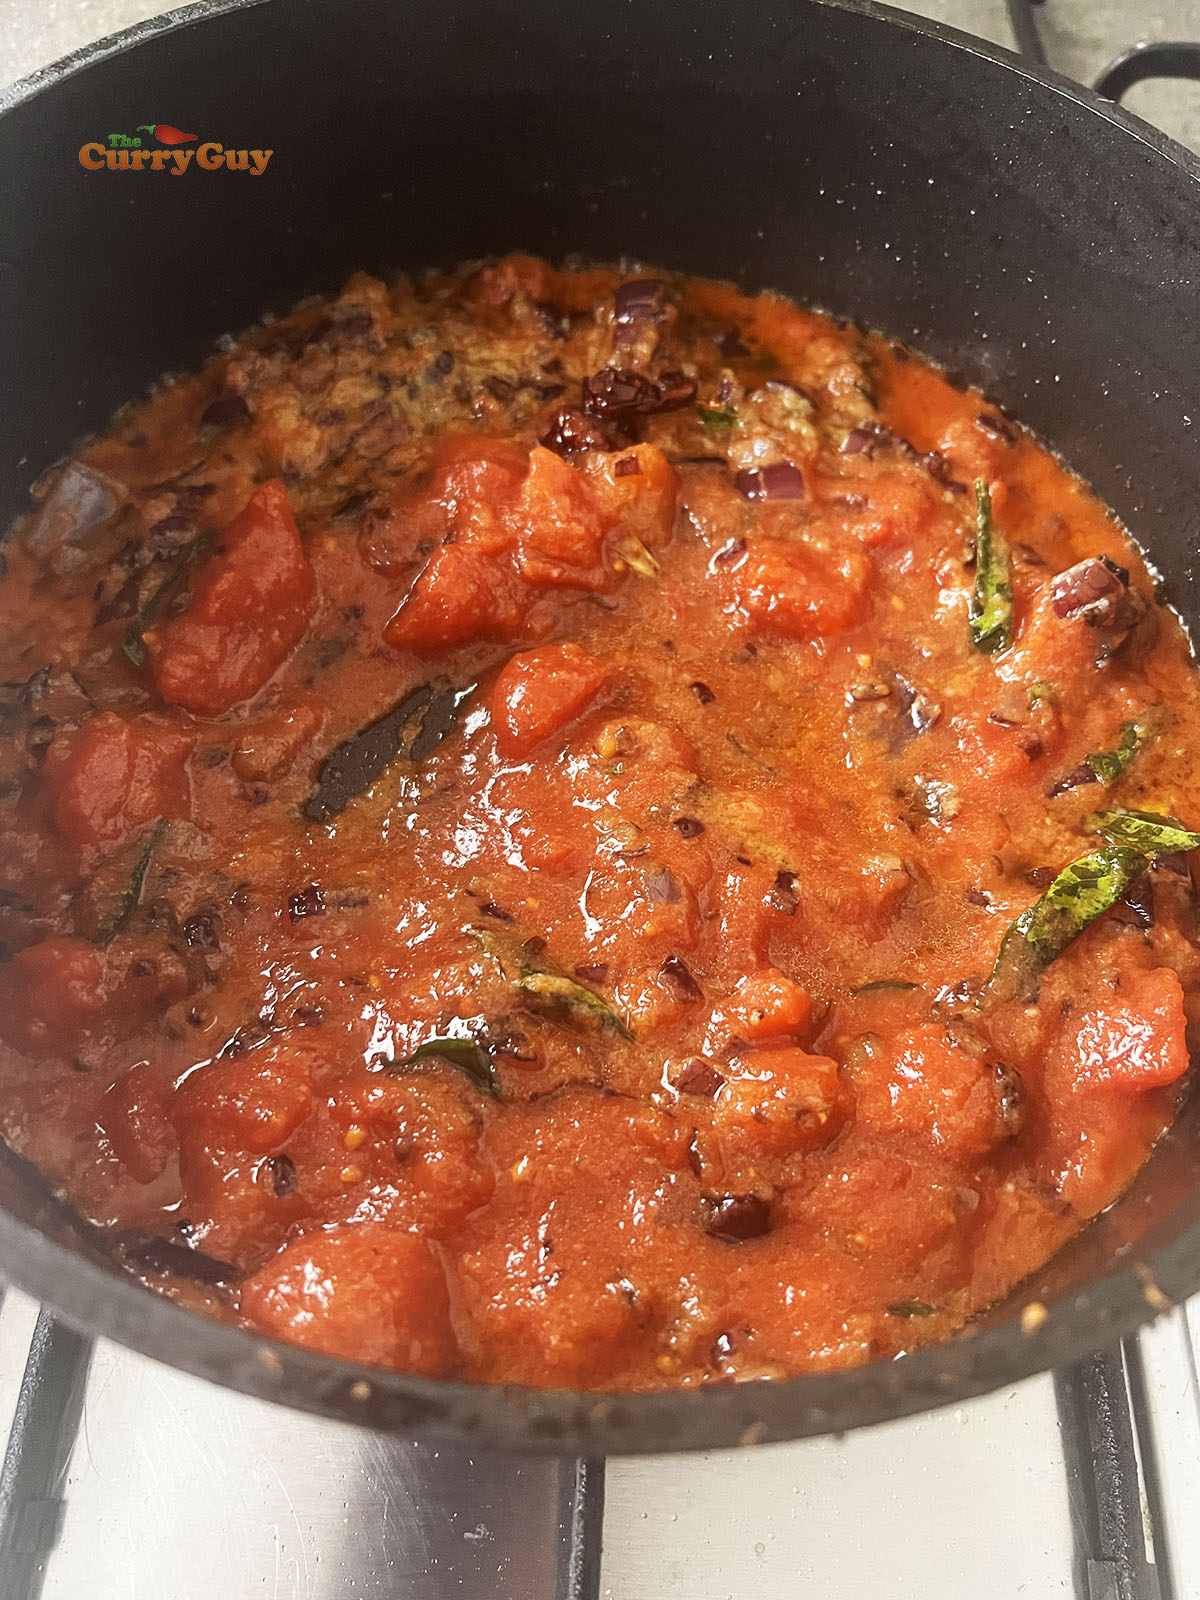 Adding chopped tomatoes to the pan.